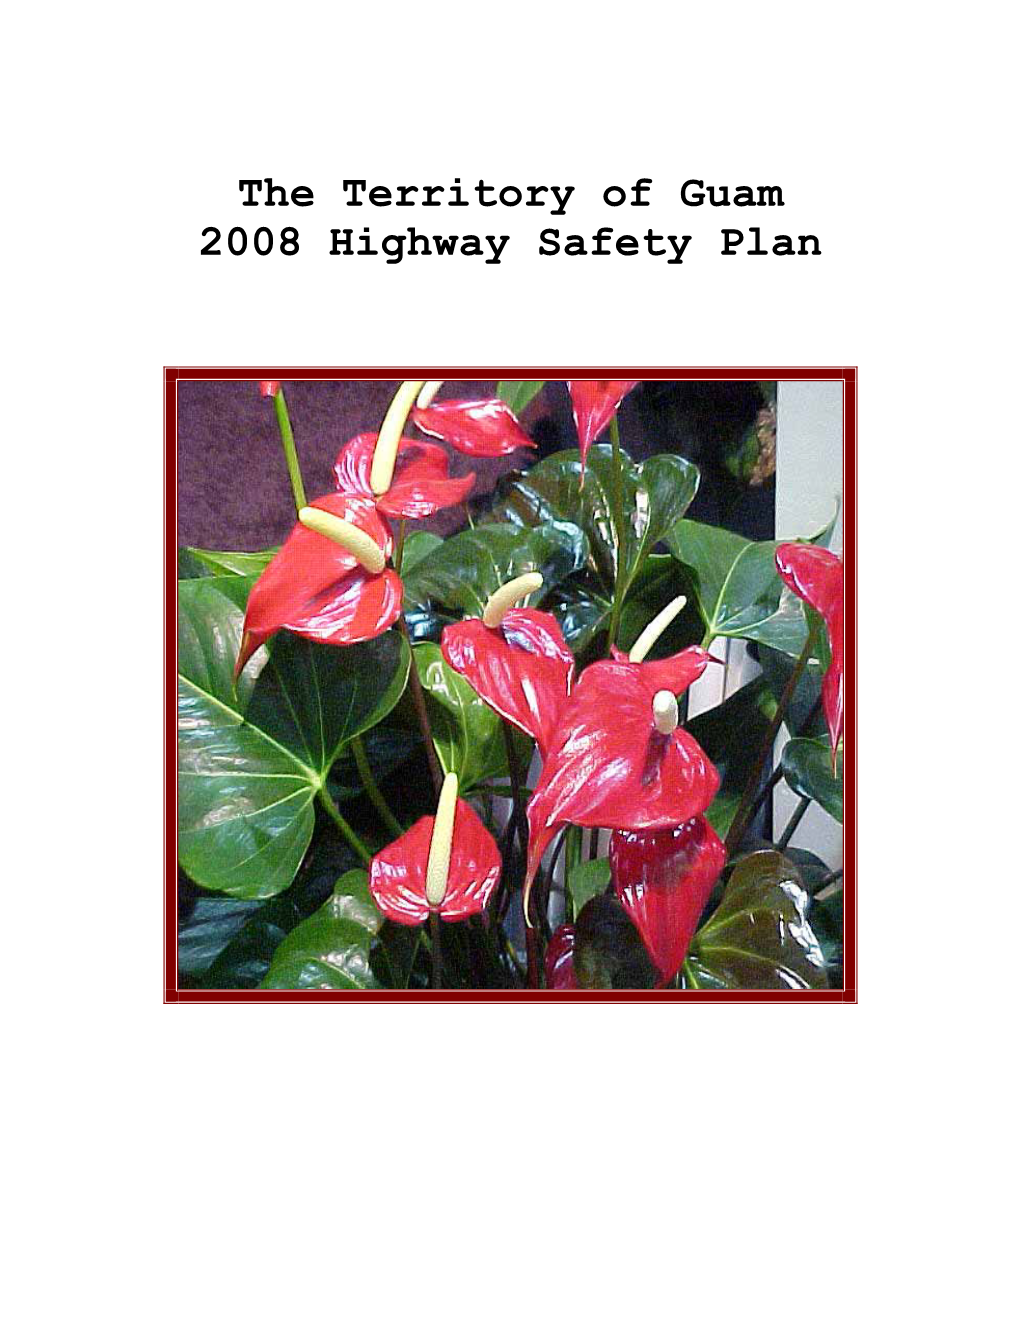 The Territory of Guam 2008 Highway Safety Plan